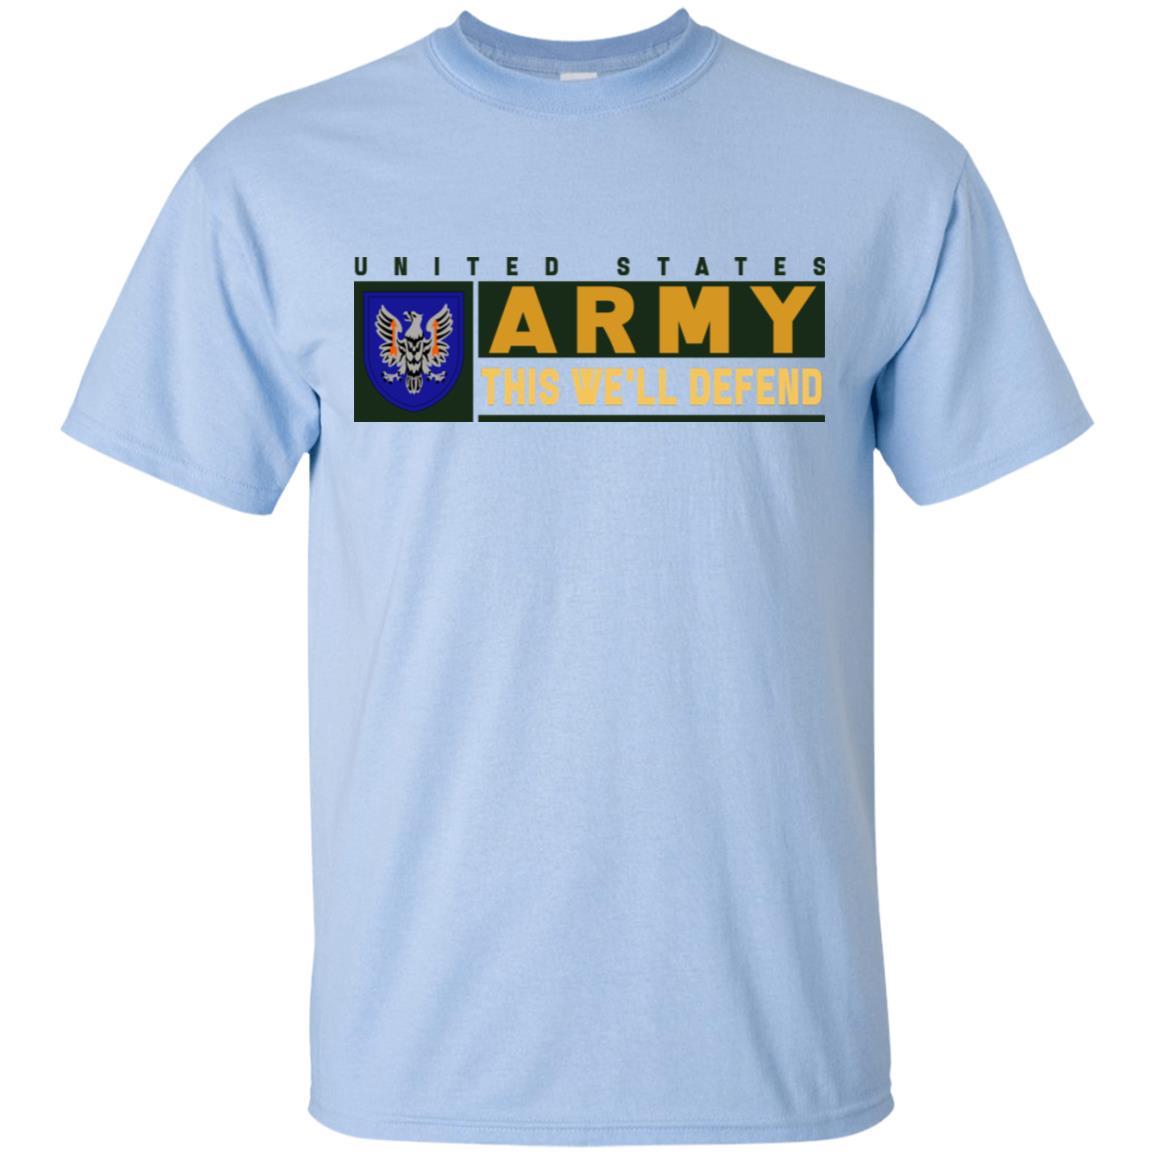 US Army 11TH AVIATION COMMAND- This We'll Defend T-Shirt On Front For Men-TShirt-Army-Veterans Nation